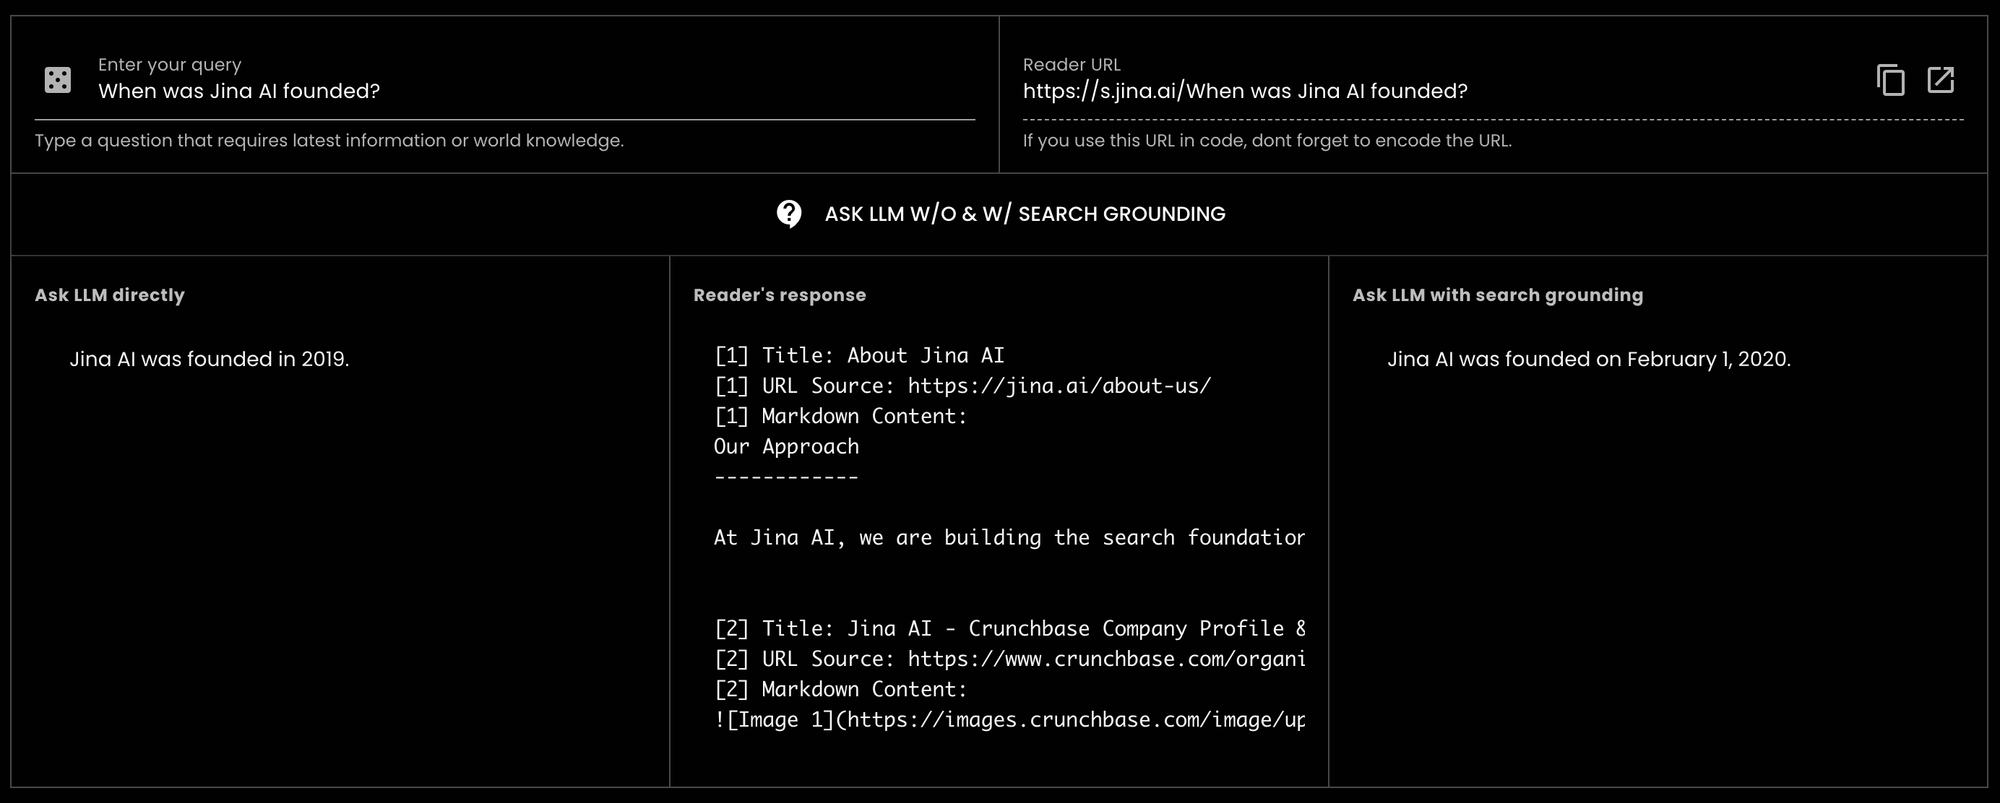 Interactive web interface for querying Jina AI's founding details with input fields, navigation options, and informational no